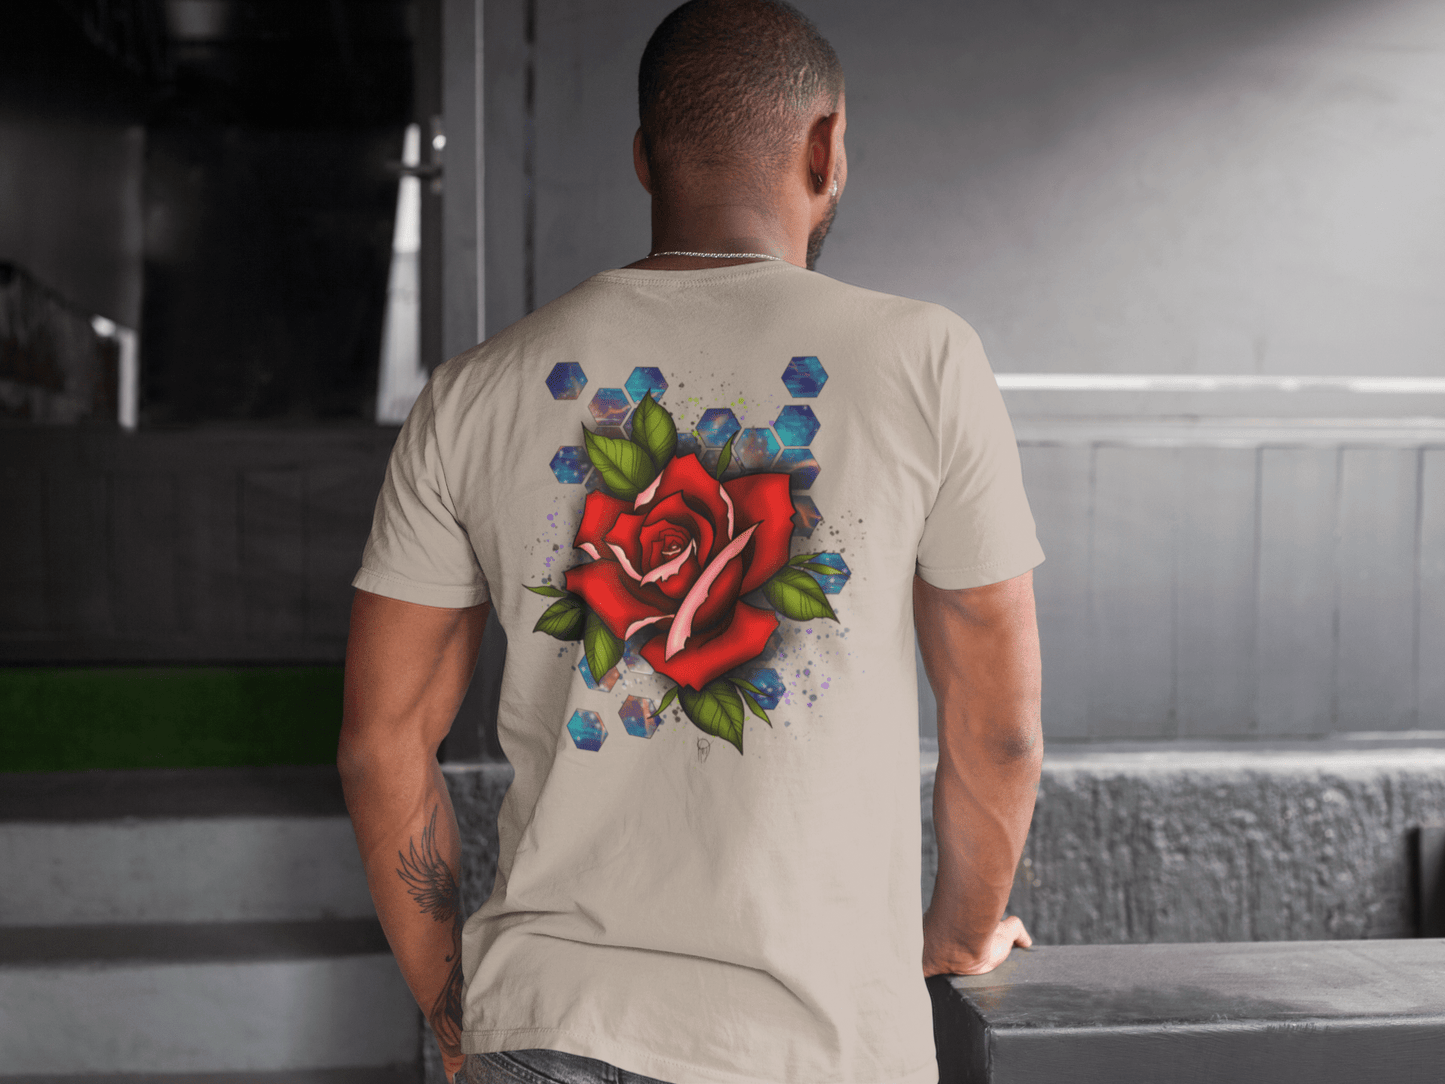 Legendary ltd. T SHIRT Rose and Stained Glass Tee by Kaylee